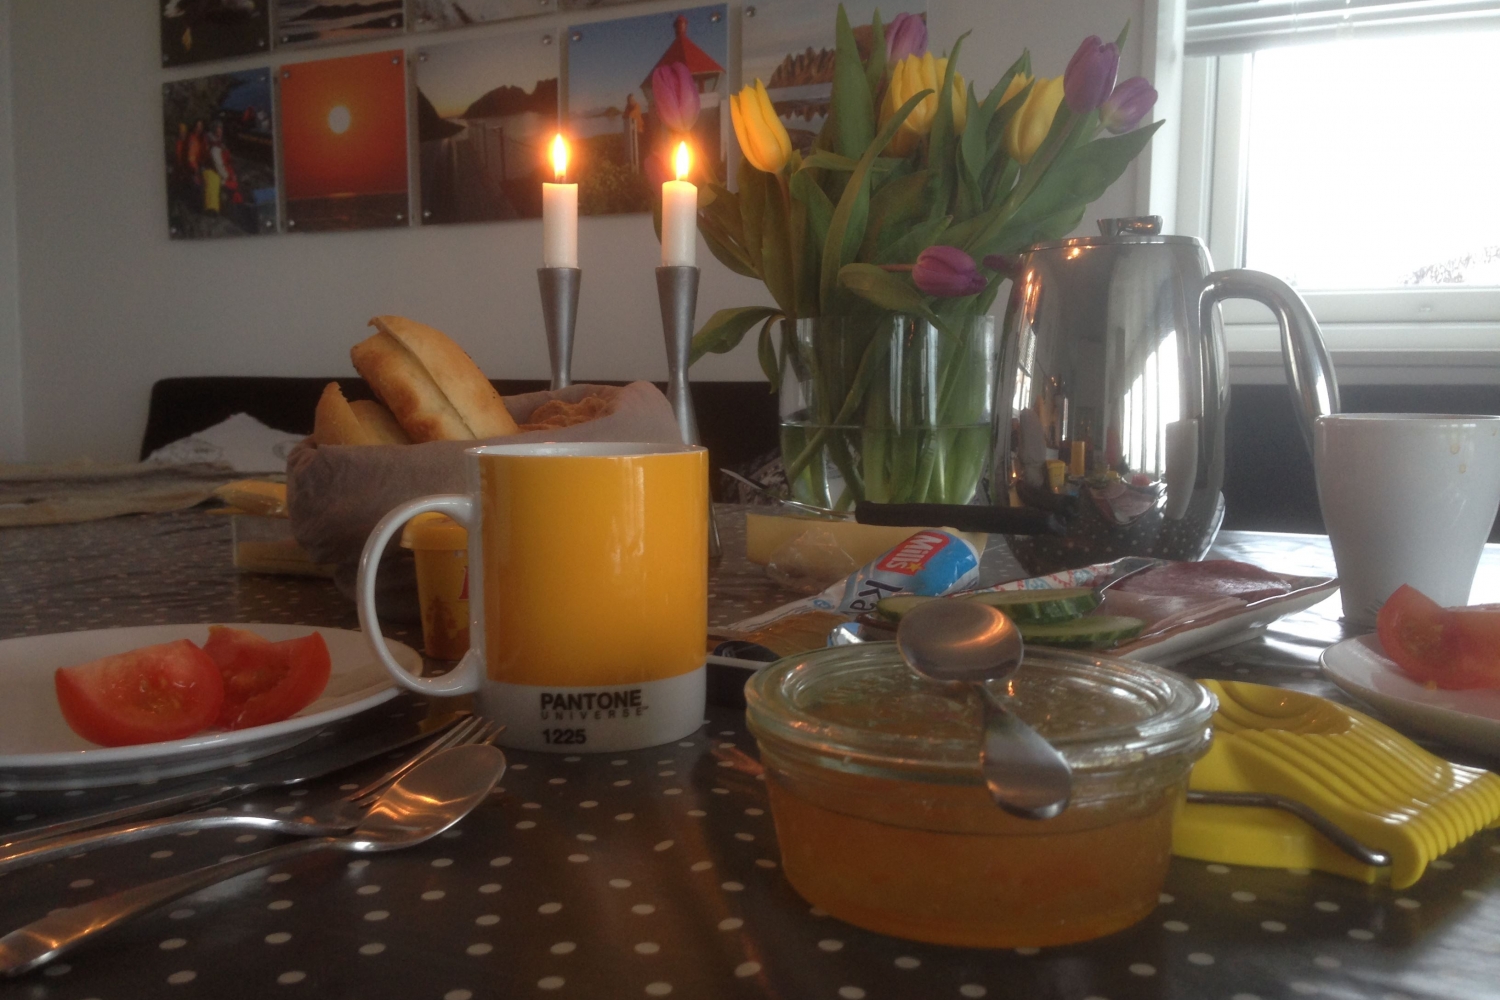 Breakfast and candles